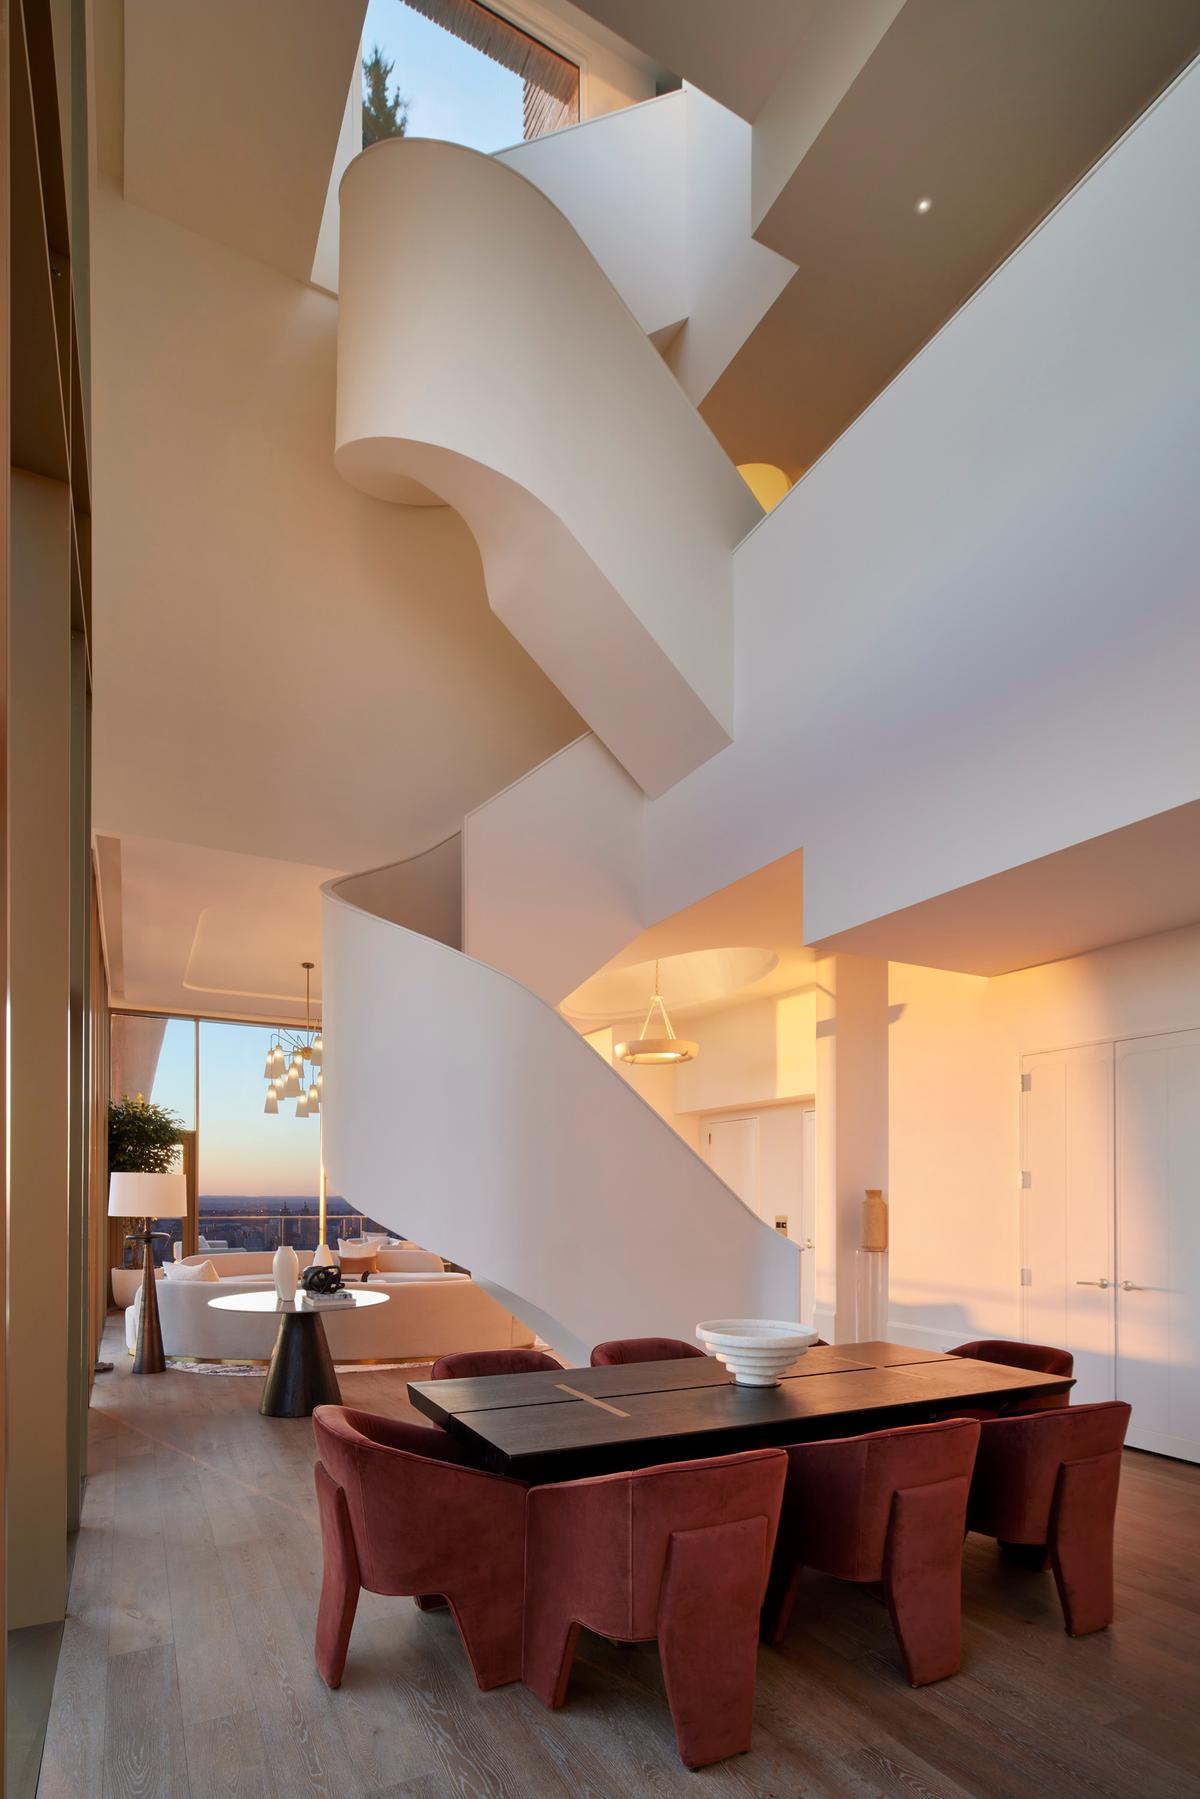 In addition to an elevator, a circular staircase provides access to all three levels. (Sean Hemmerle)